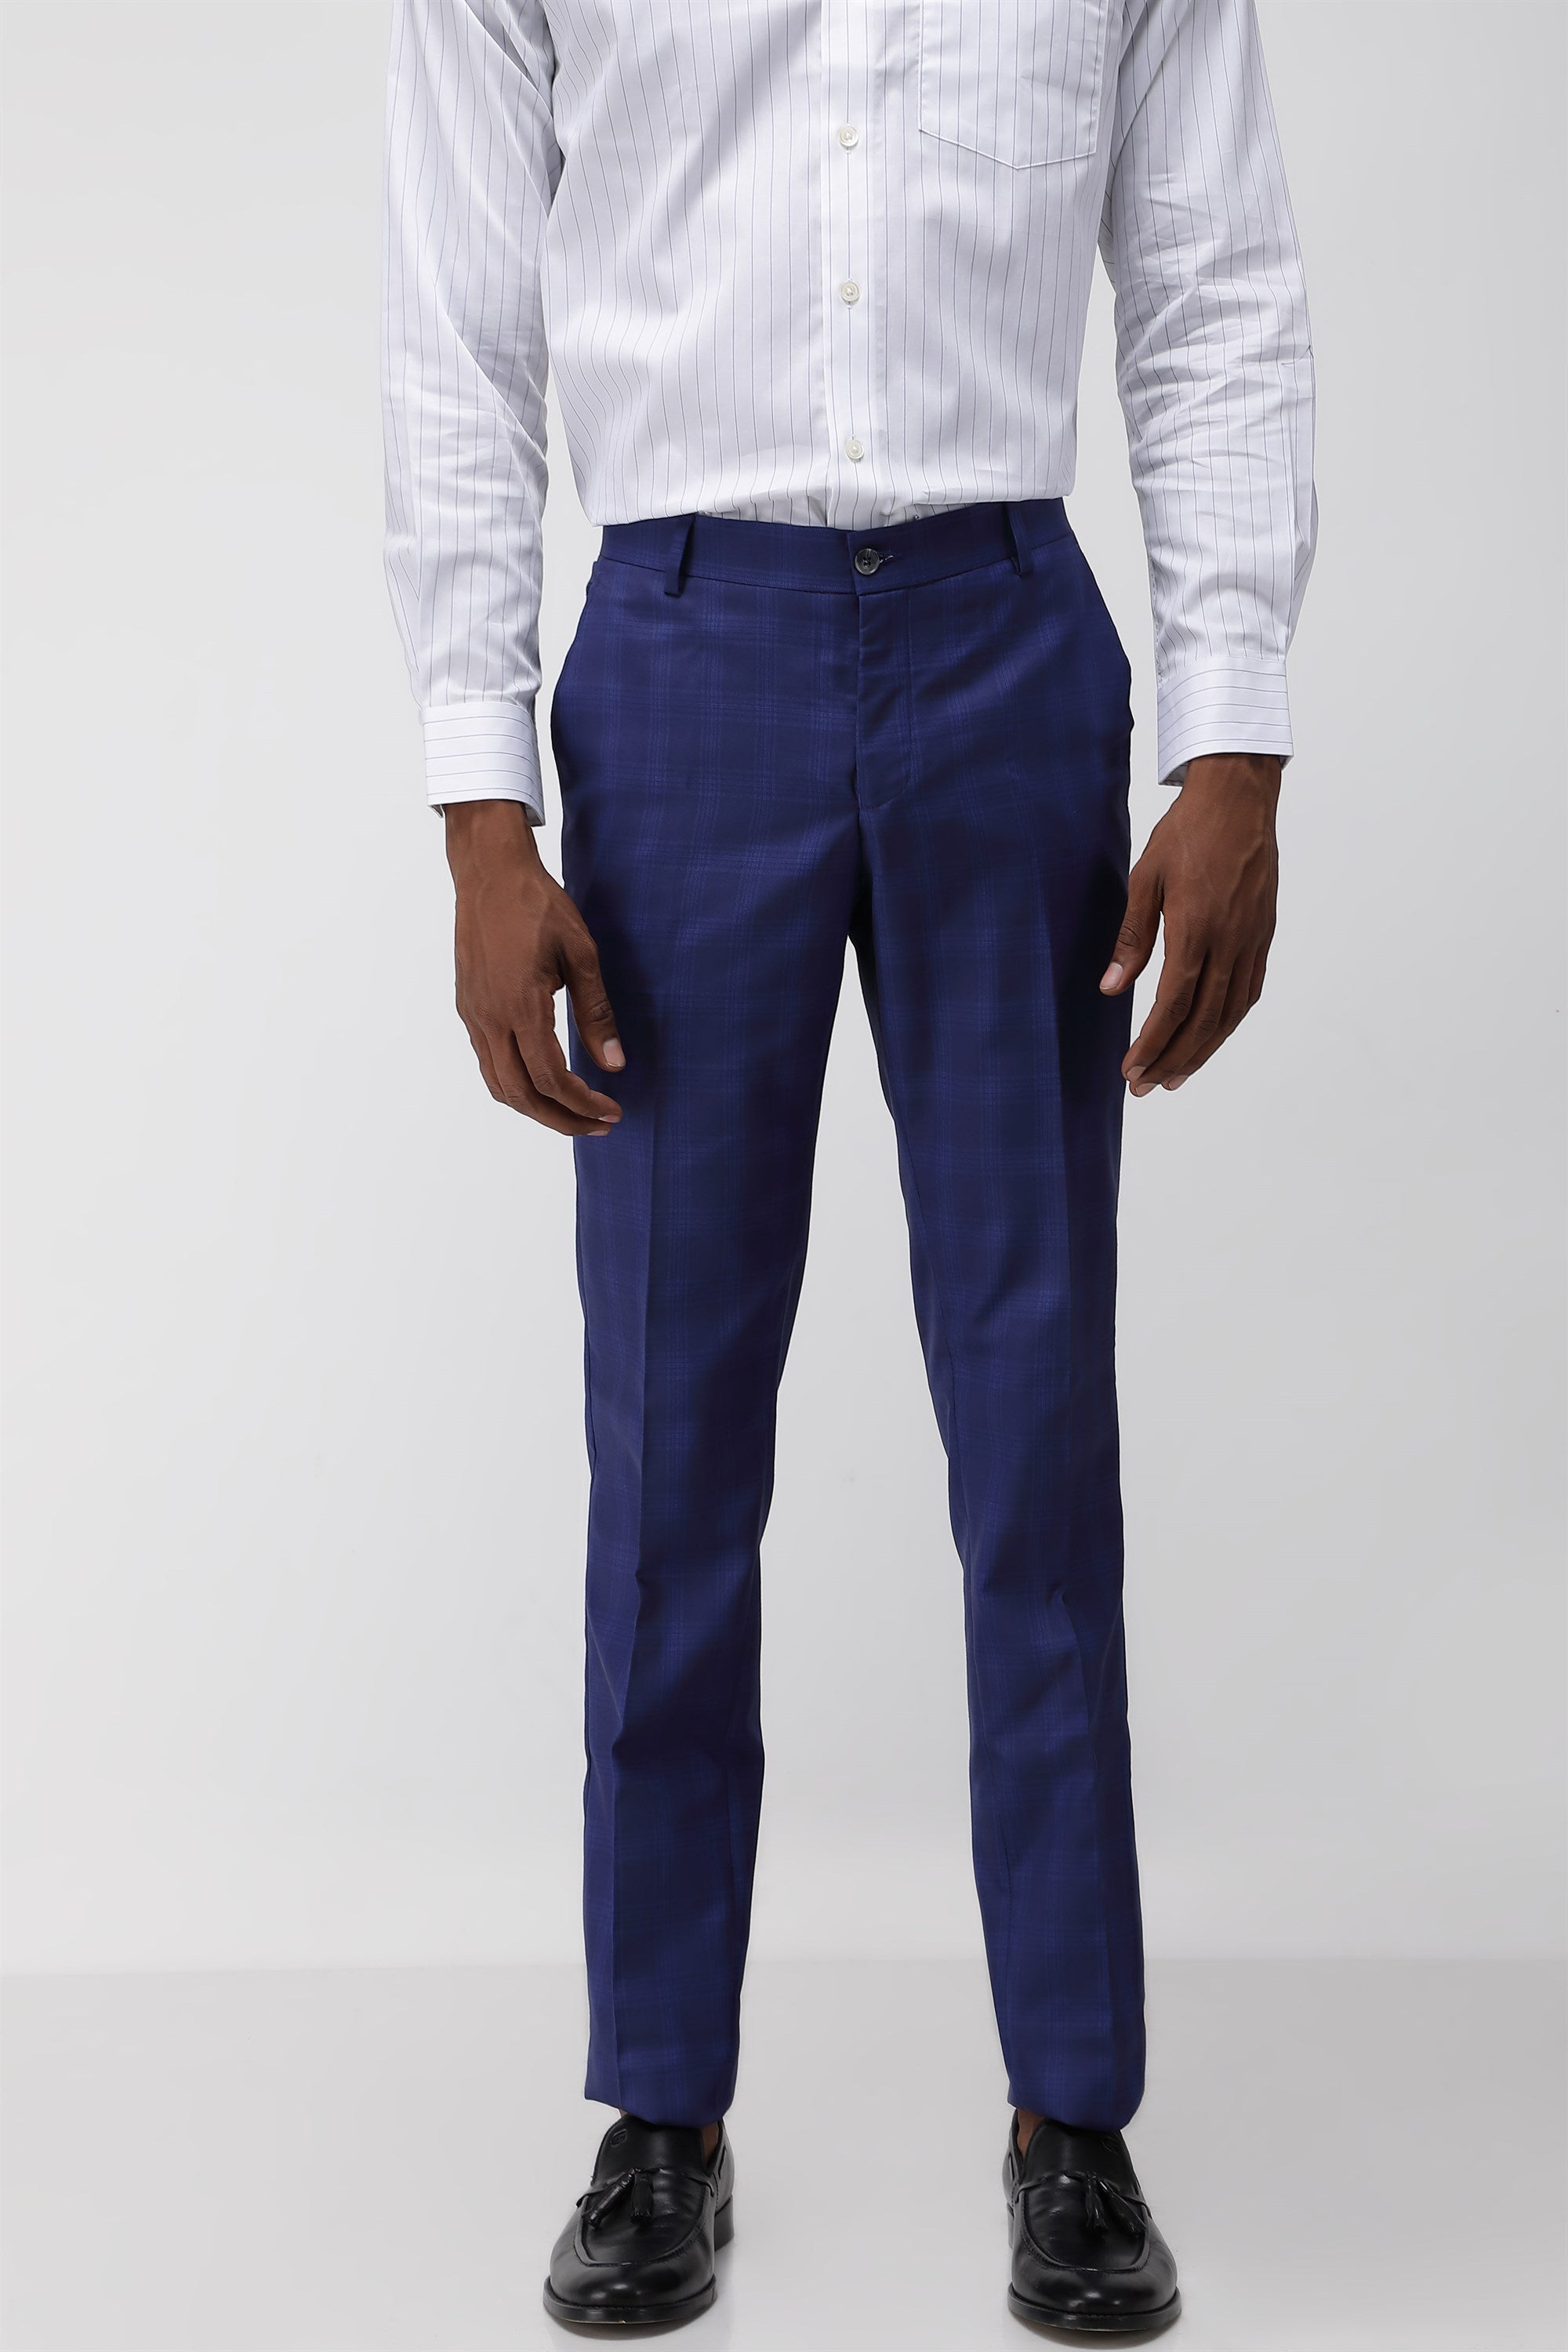 Ankle Fit Navy Blue 4 Way Stretchable Formal Pants – Stagbeetle